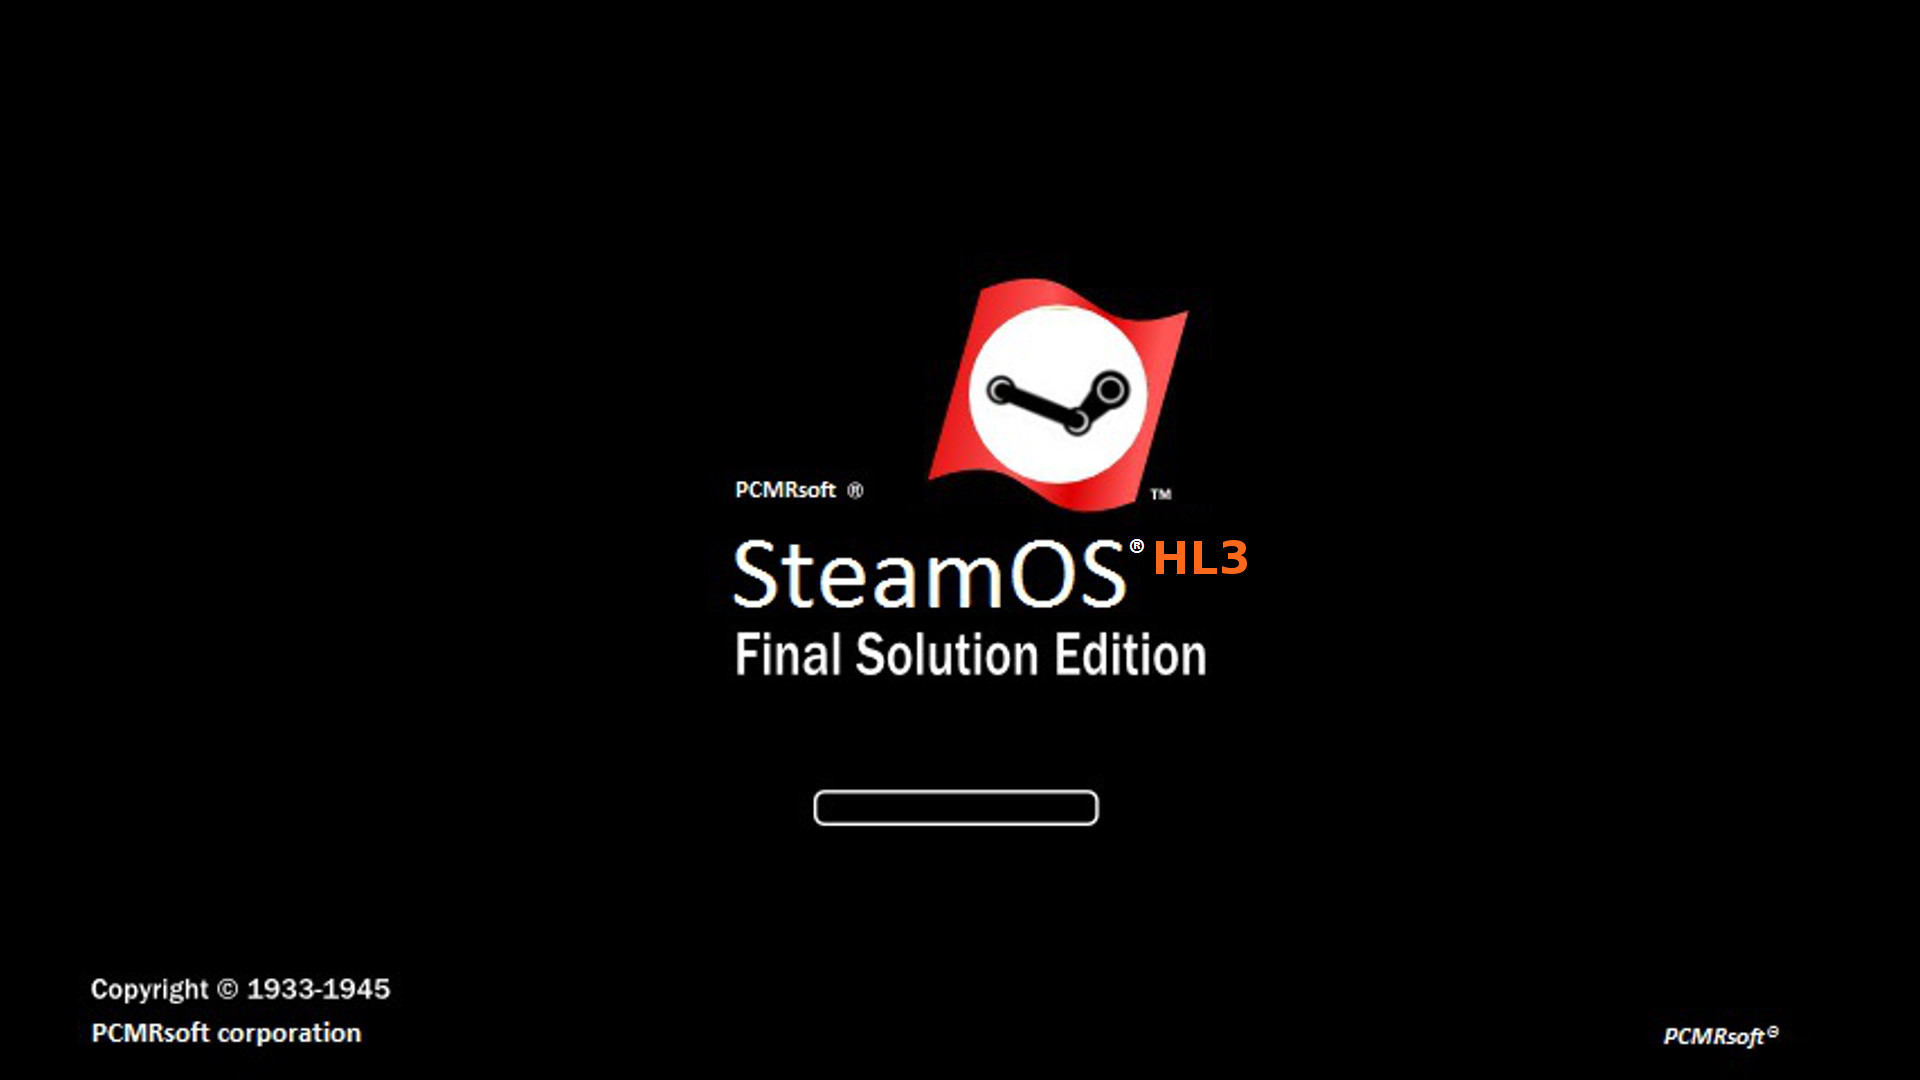 SteamOS final solution edition